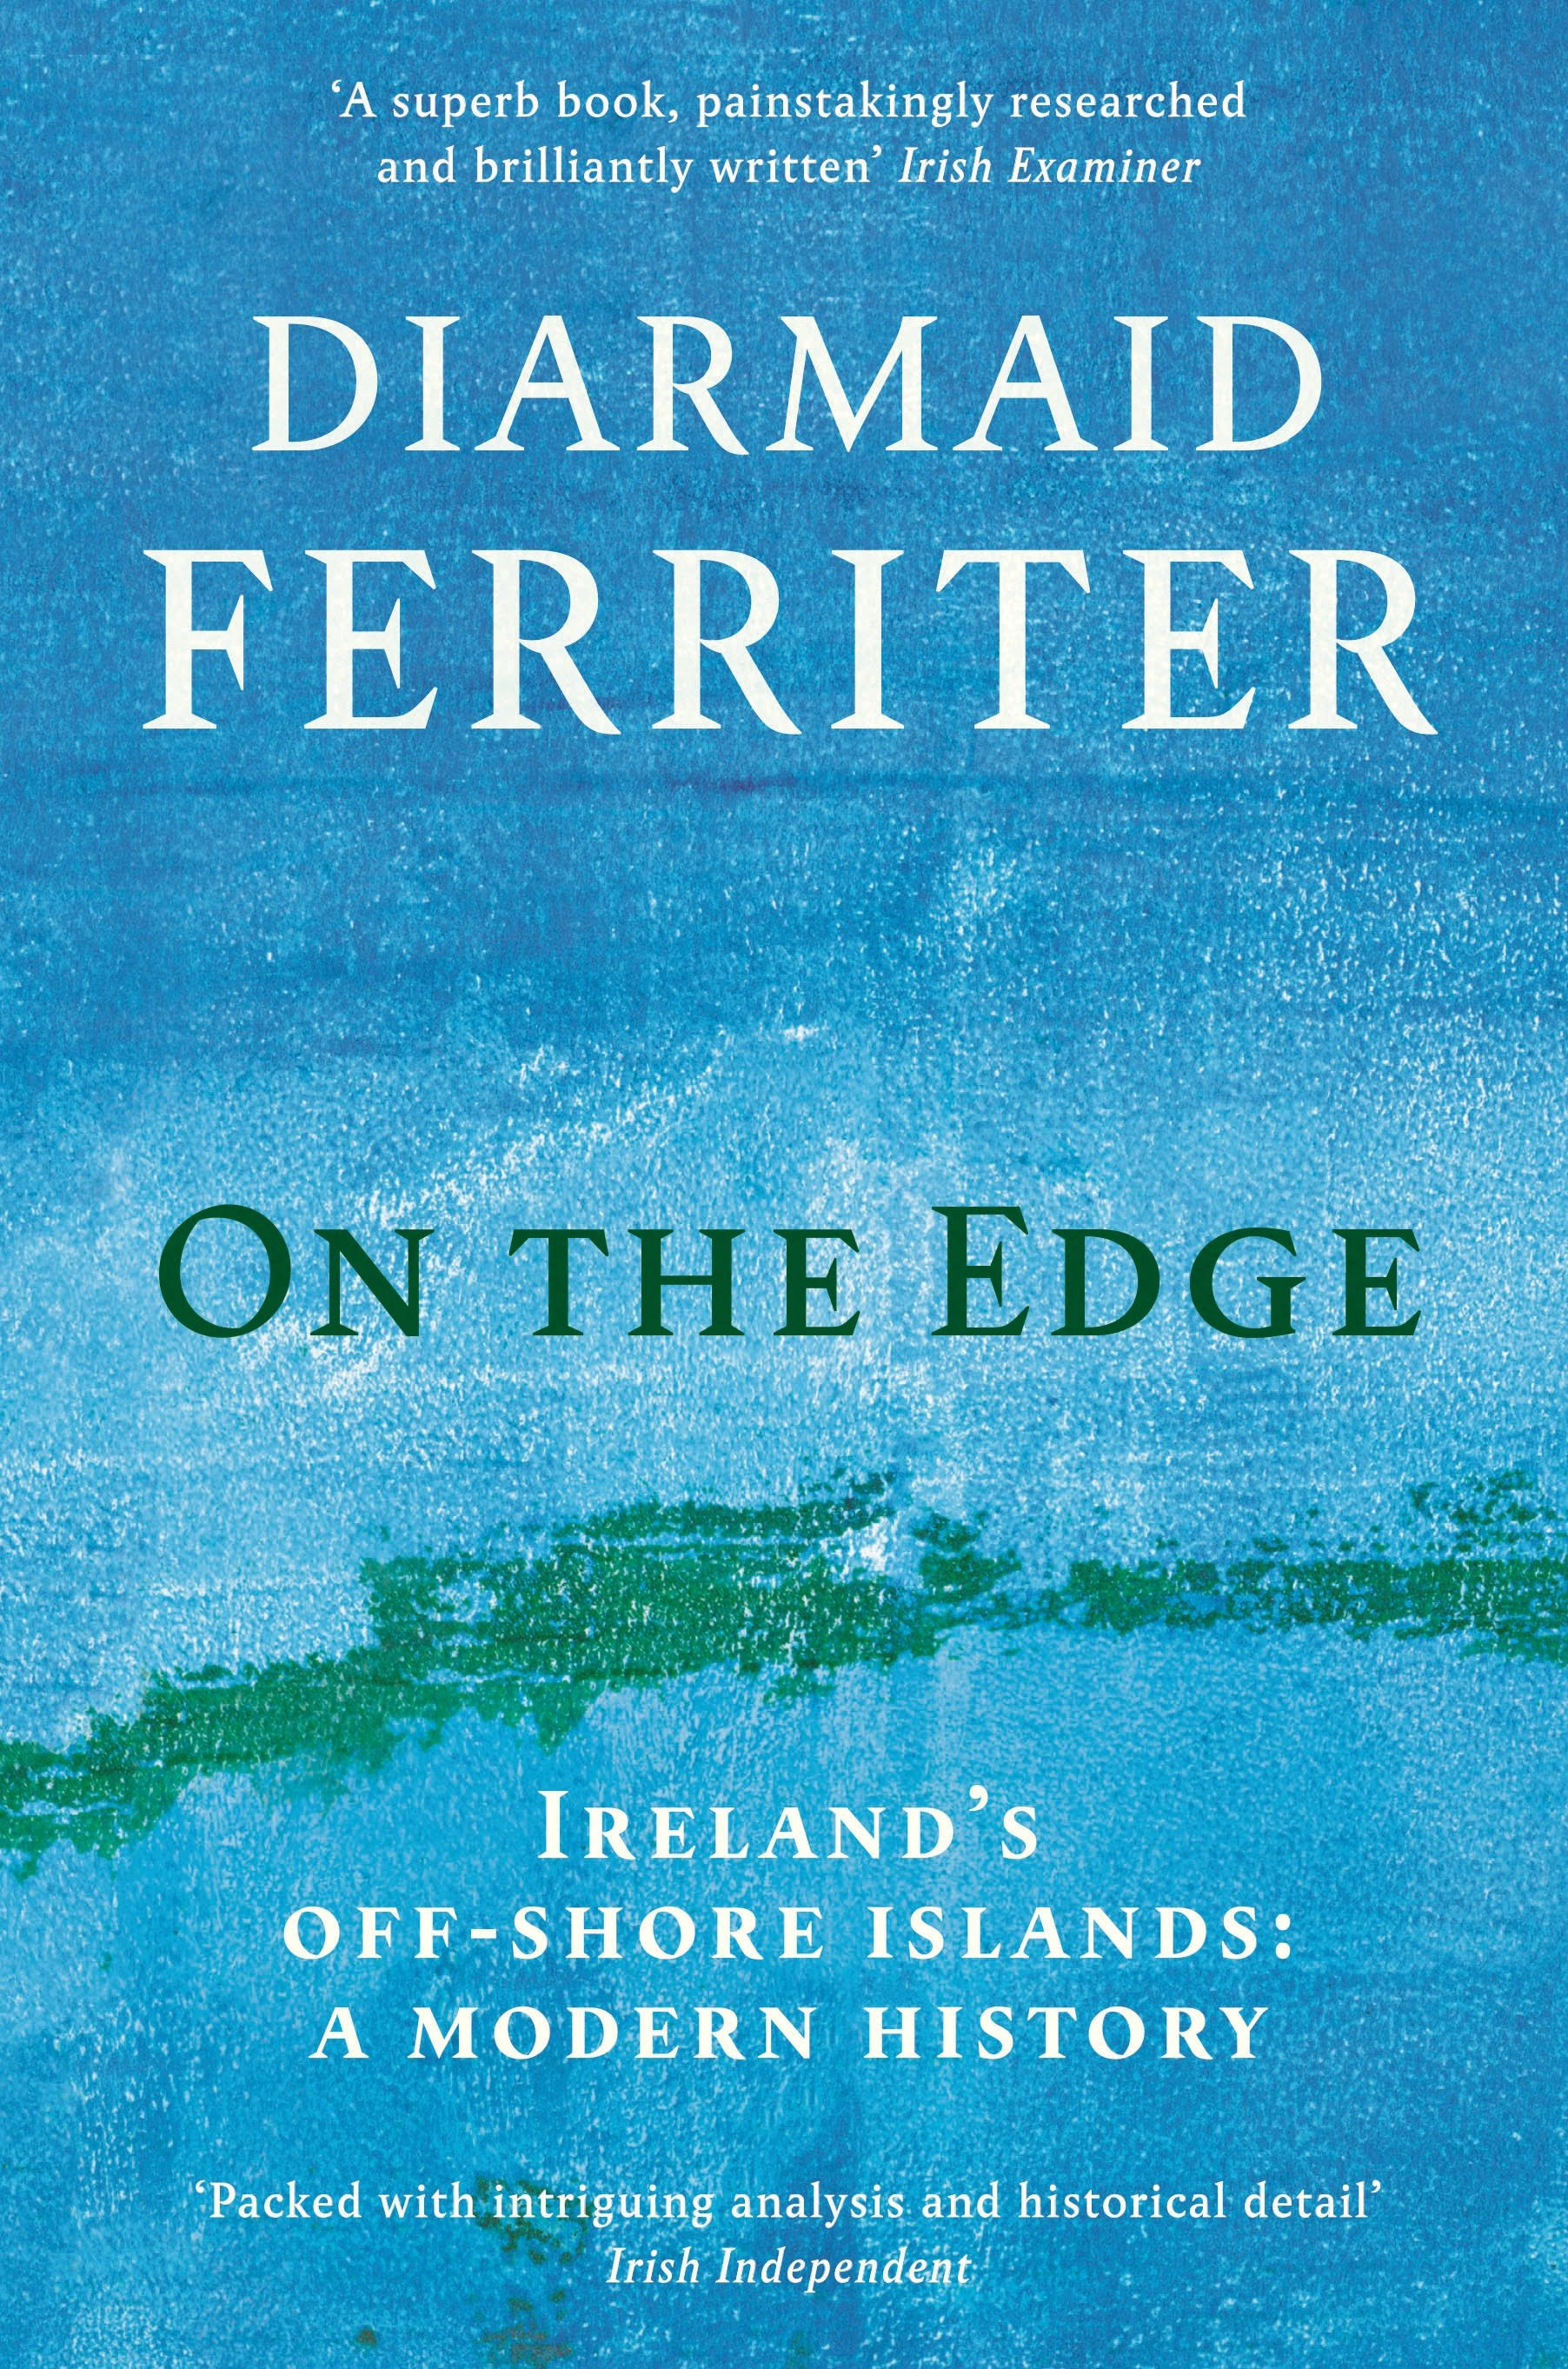 On The Edge by Diarmaid Ferriter